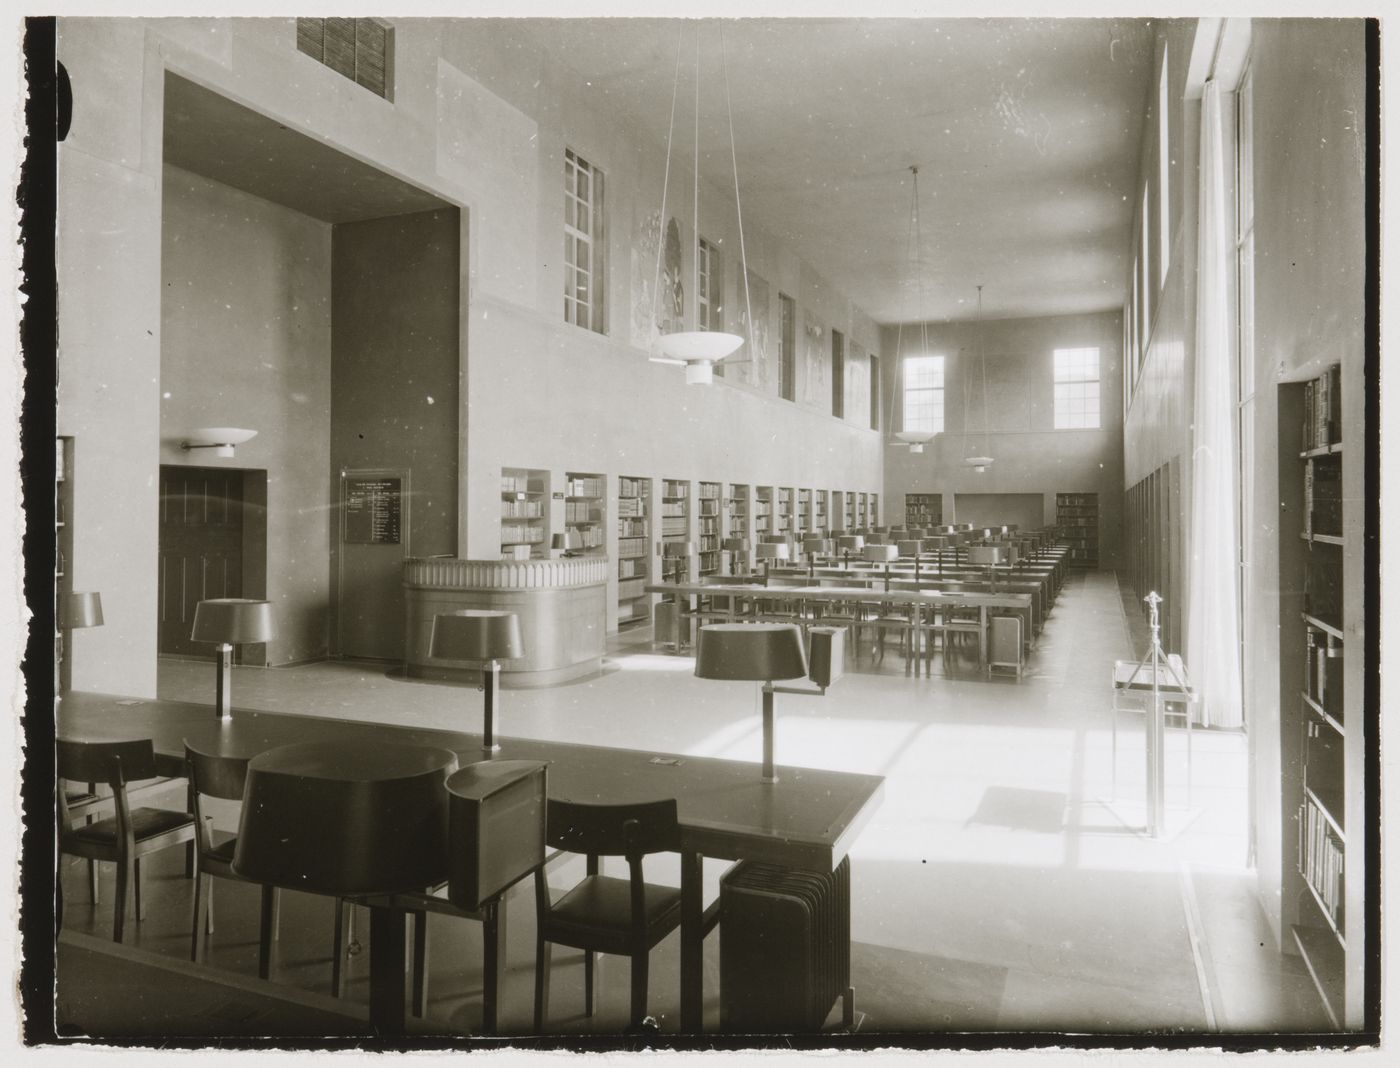 Interior view of the south reading room of Stockholm Public Library showing tables, chairs and bookshelves, 51-55 Odengatan, Stockholm